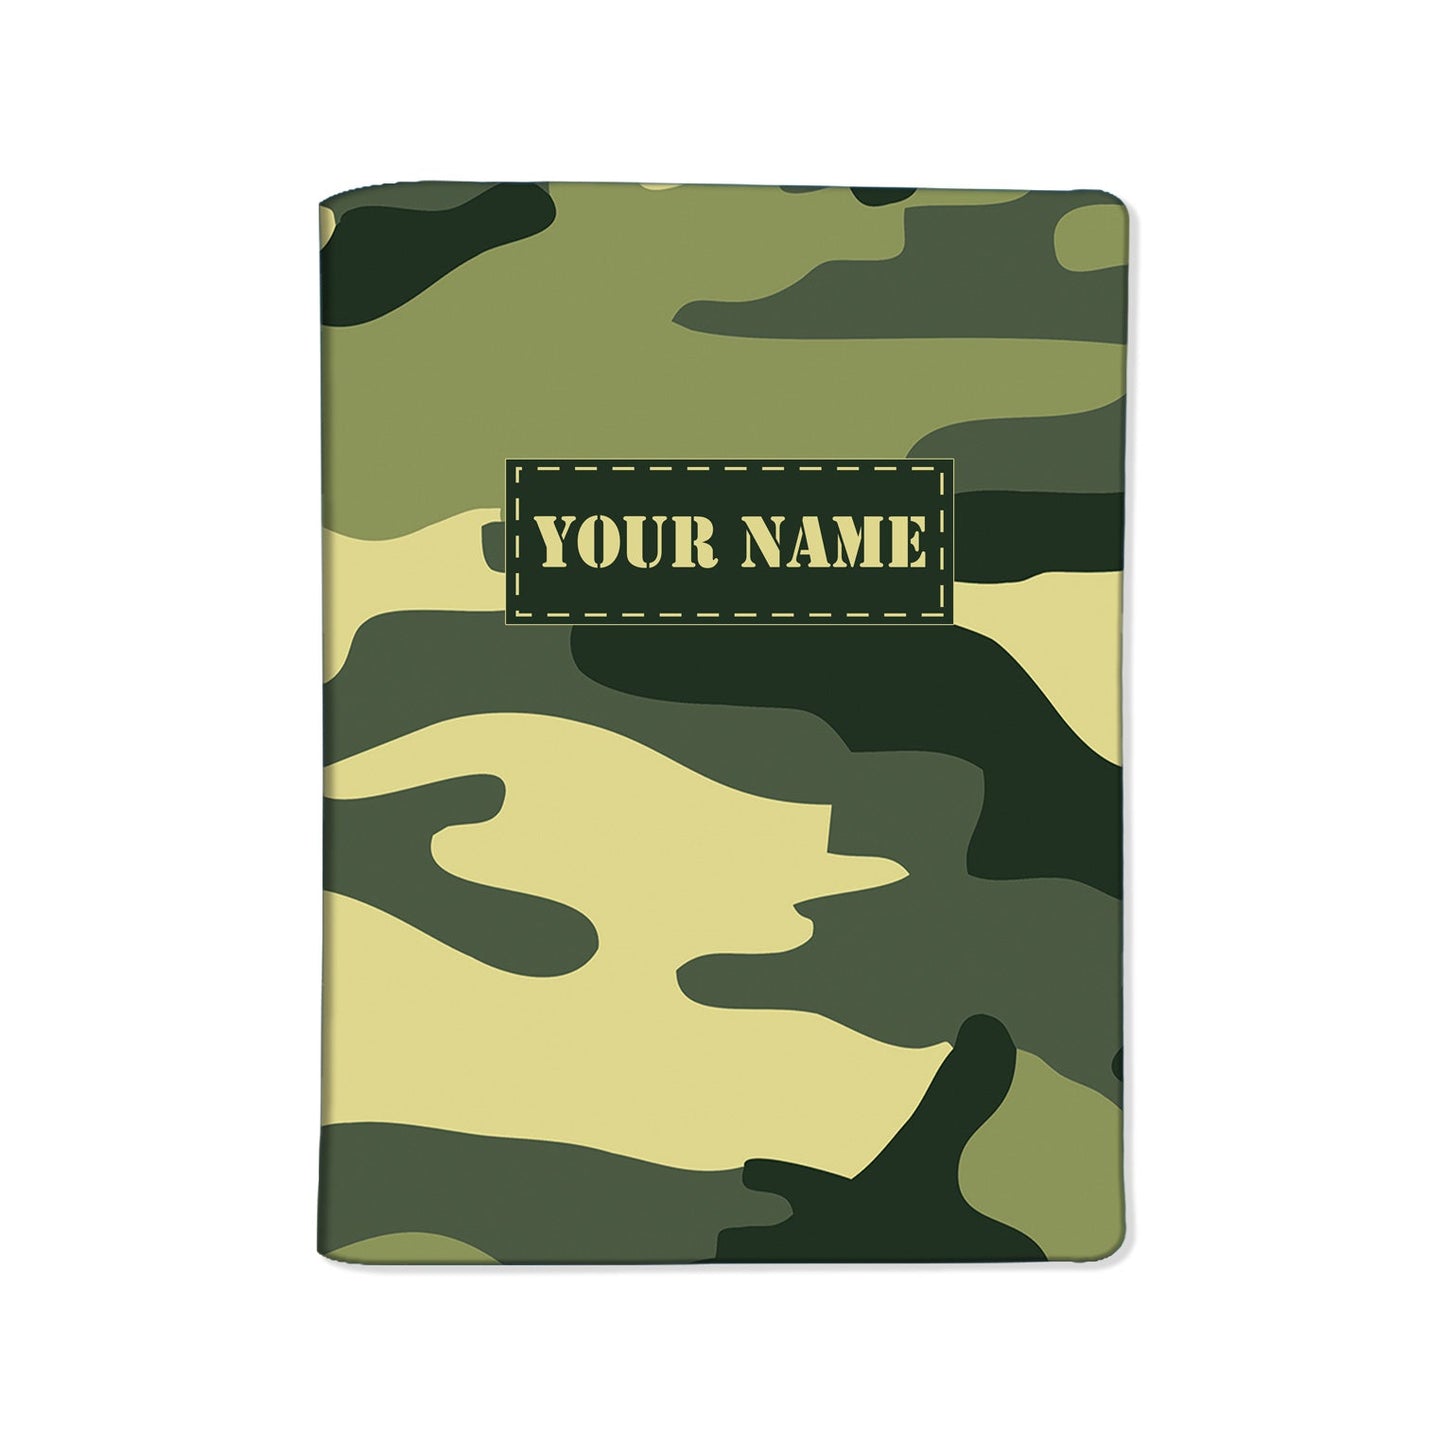 Personalised Passport Cover and Baggage Tag Combo -Military Army Camo Nutcase